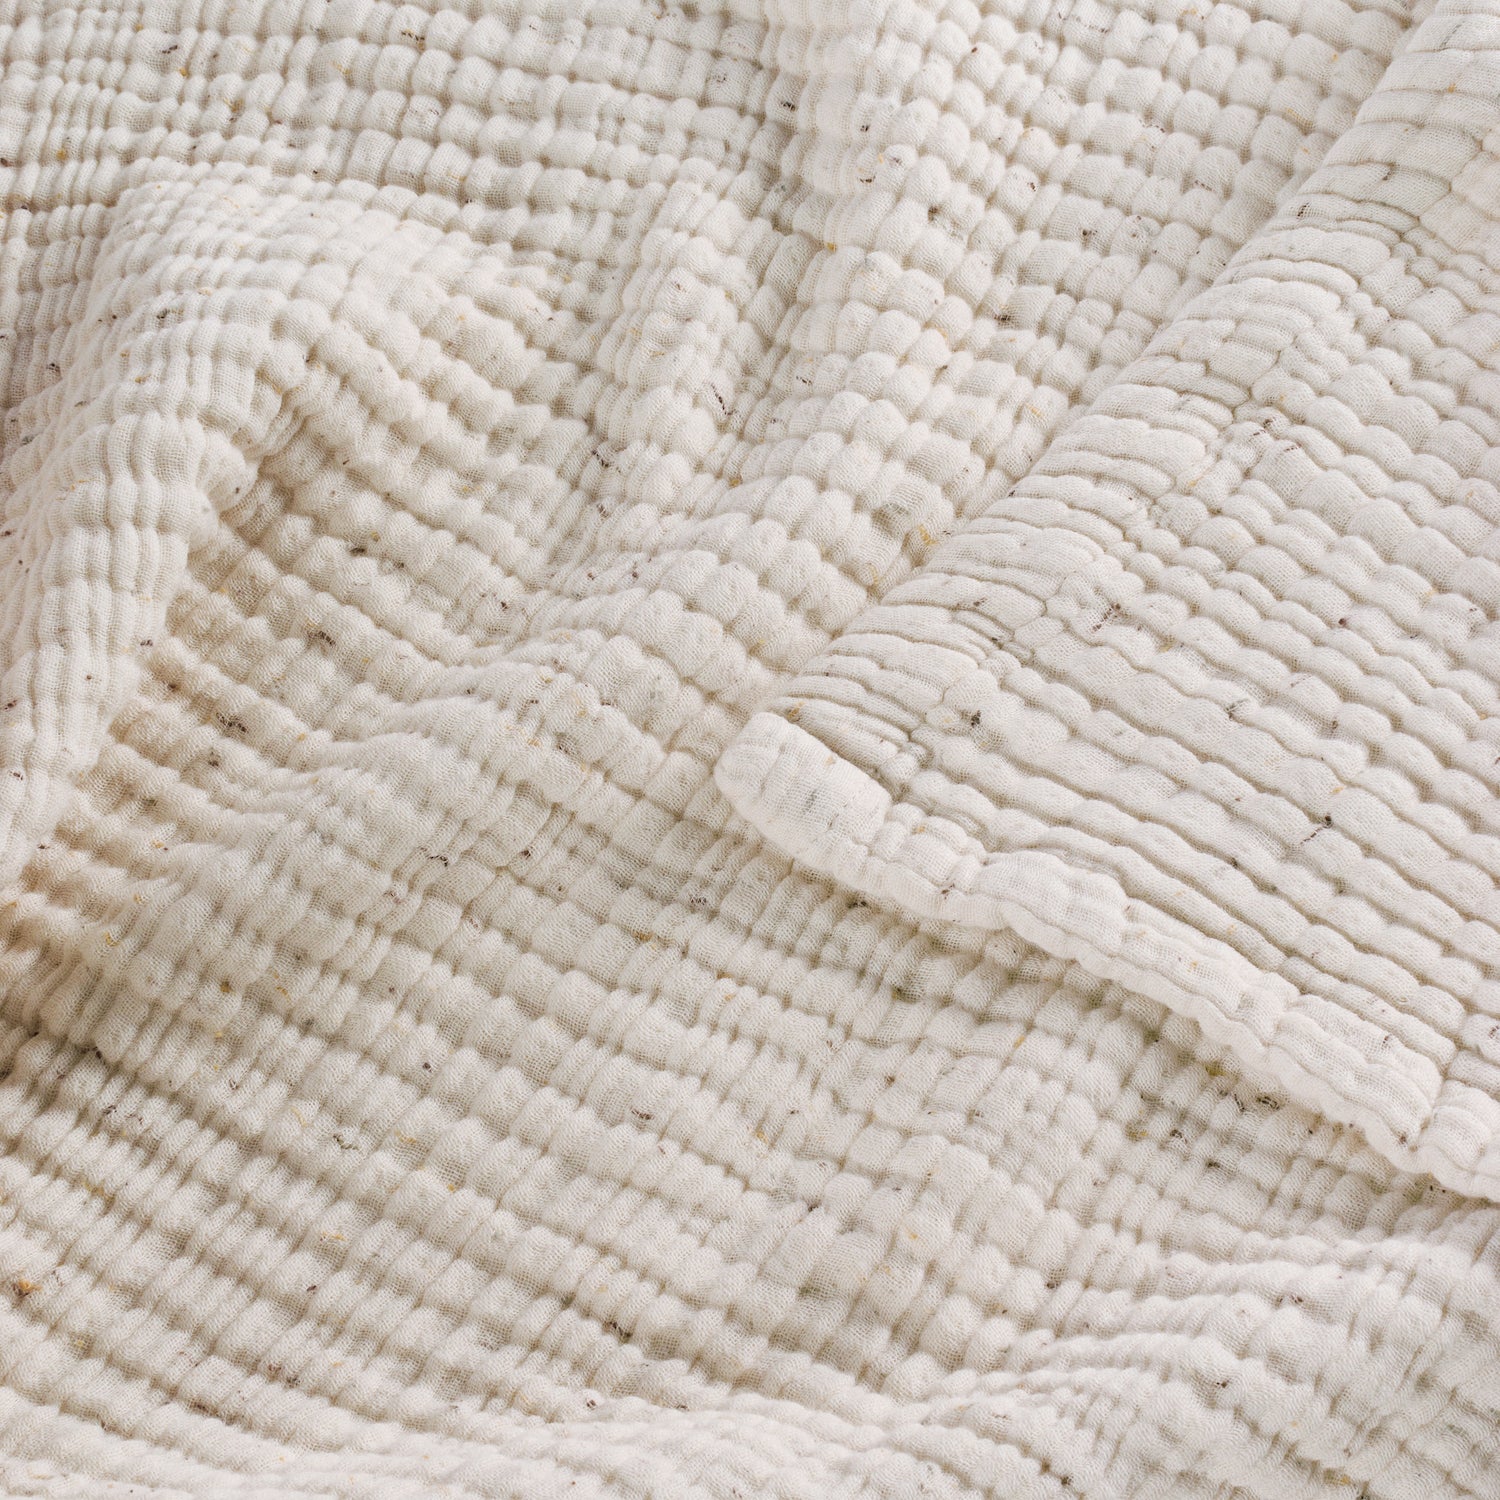 The Speckled Cotton Throw